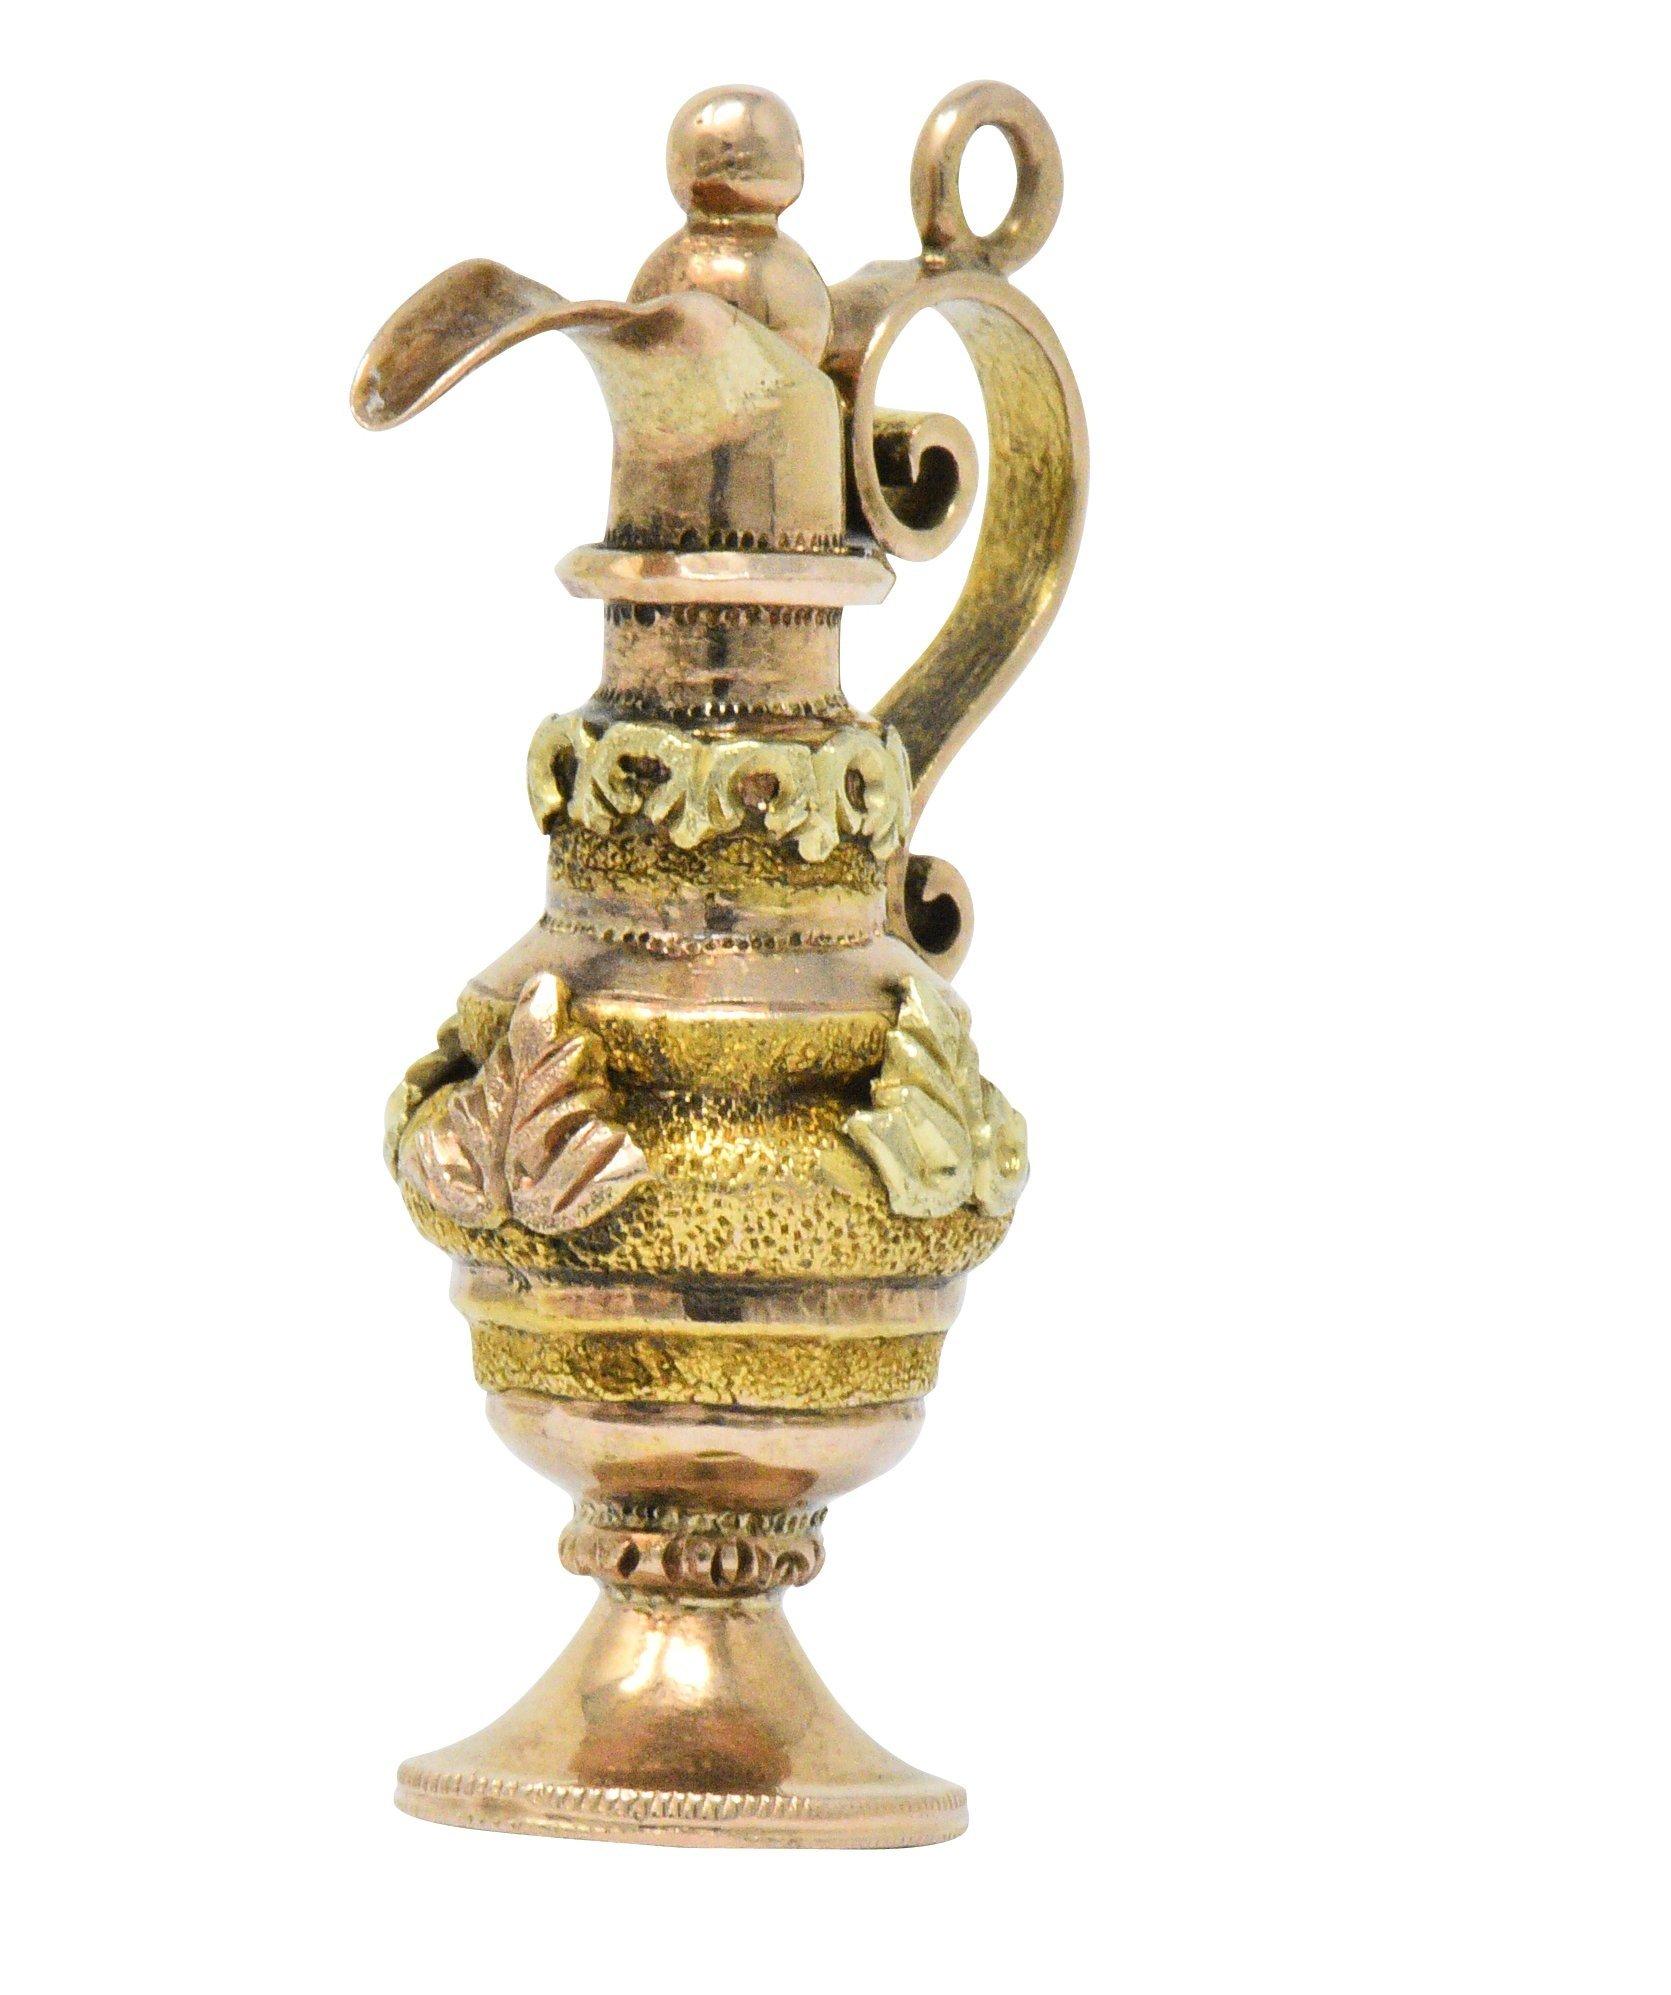 Designed as an ornate rose gold ewer with a scrolled handle and gold bead top

Decorated by applied rose and green gold leaves 

Accented by yellow gold banding with a highly stippled texture

Partial maker's mark

Circa: 1860s

Measuring approx.: